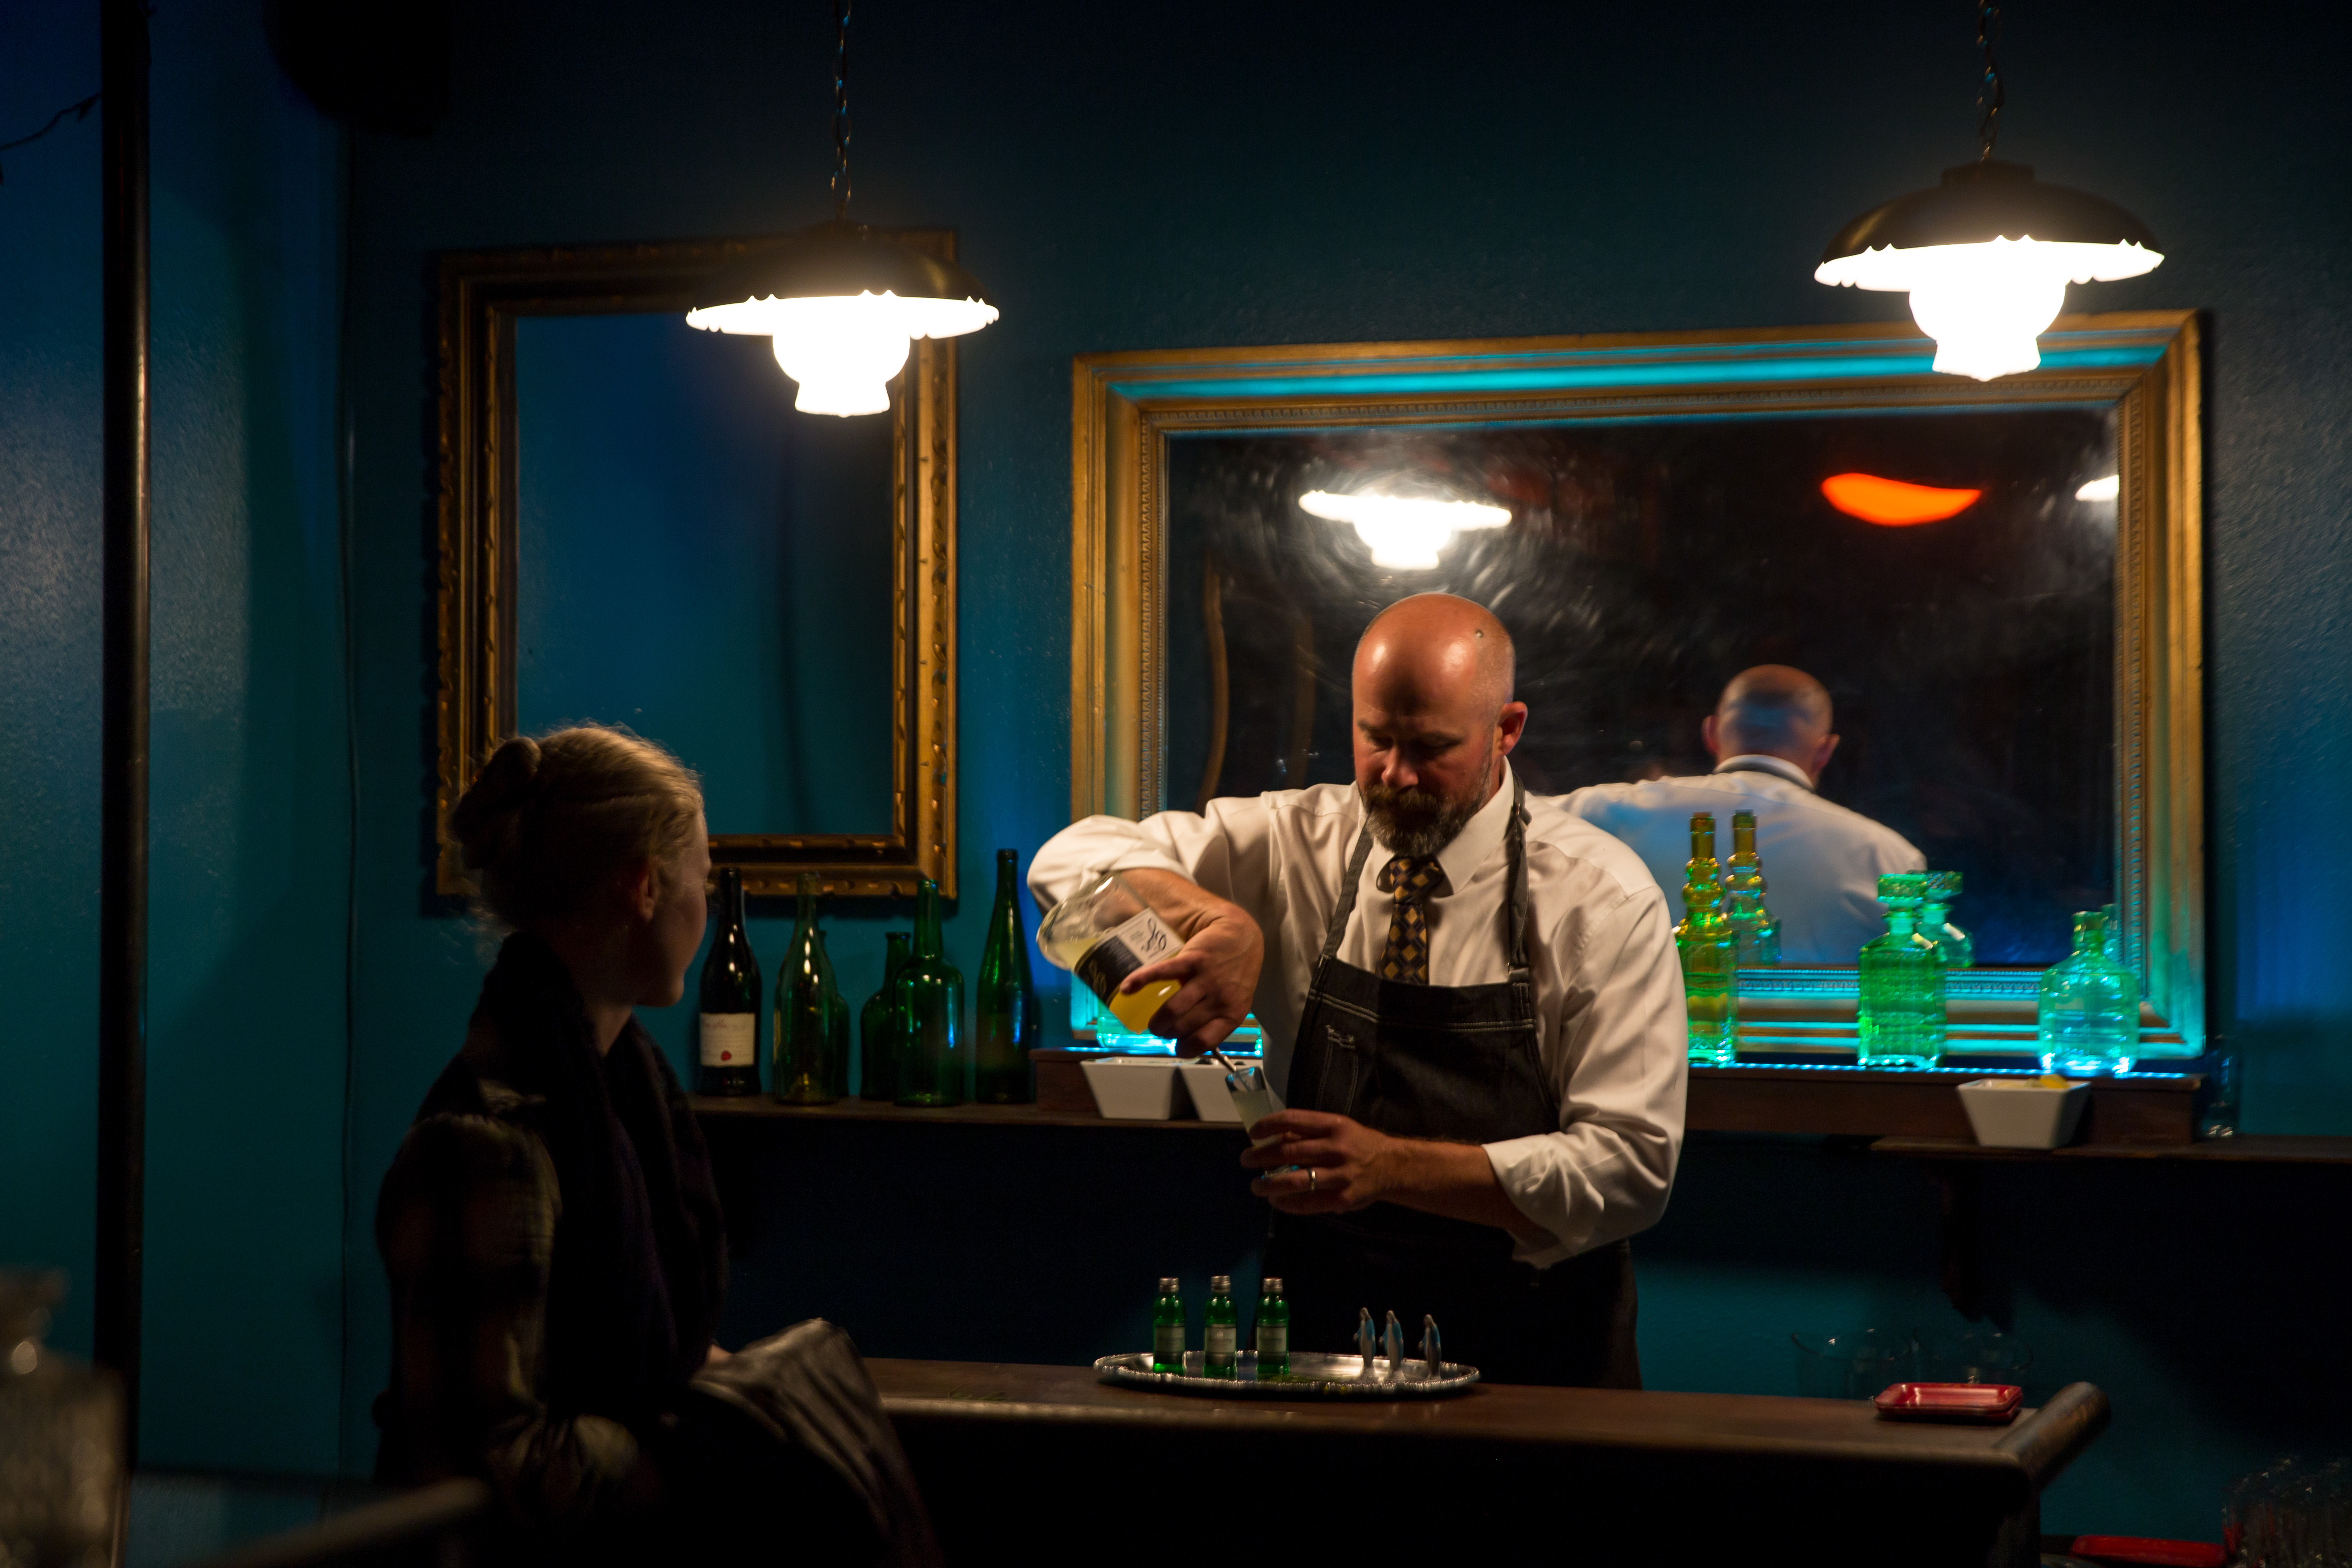 A man pours a drink at a bar while a woman looks on. There is a mirror behind him. ﻿